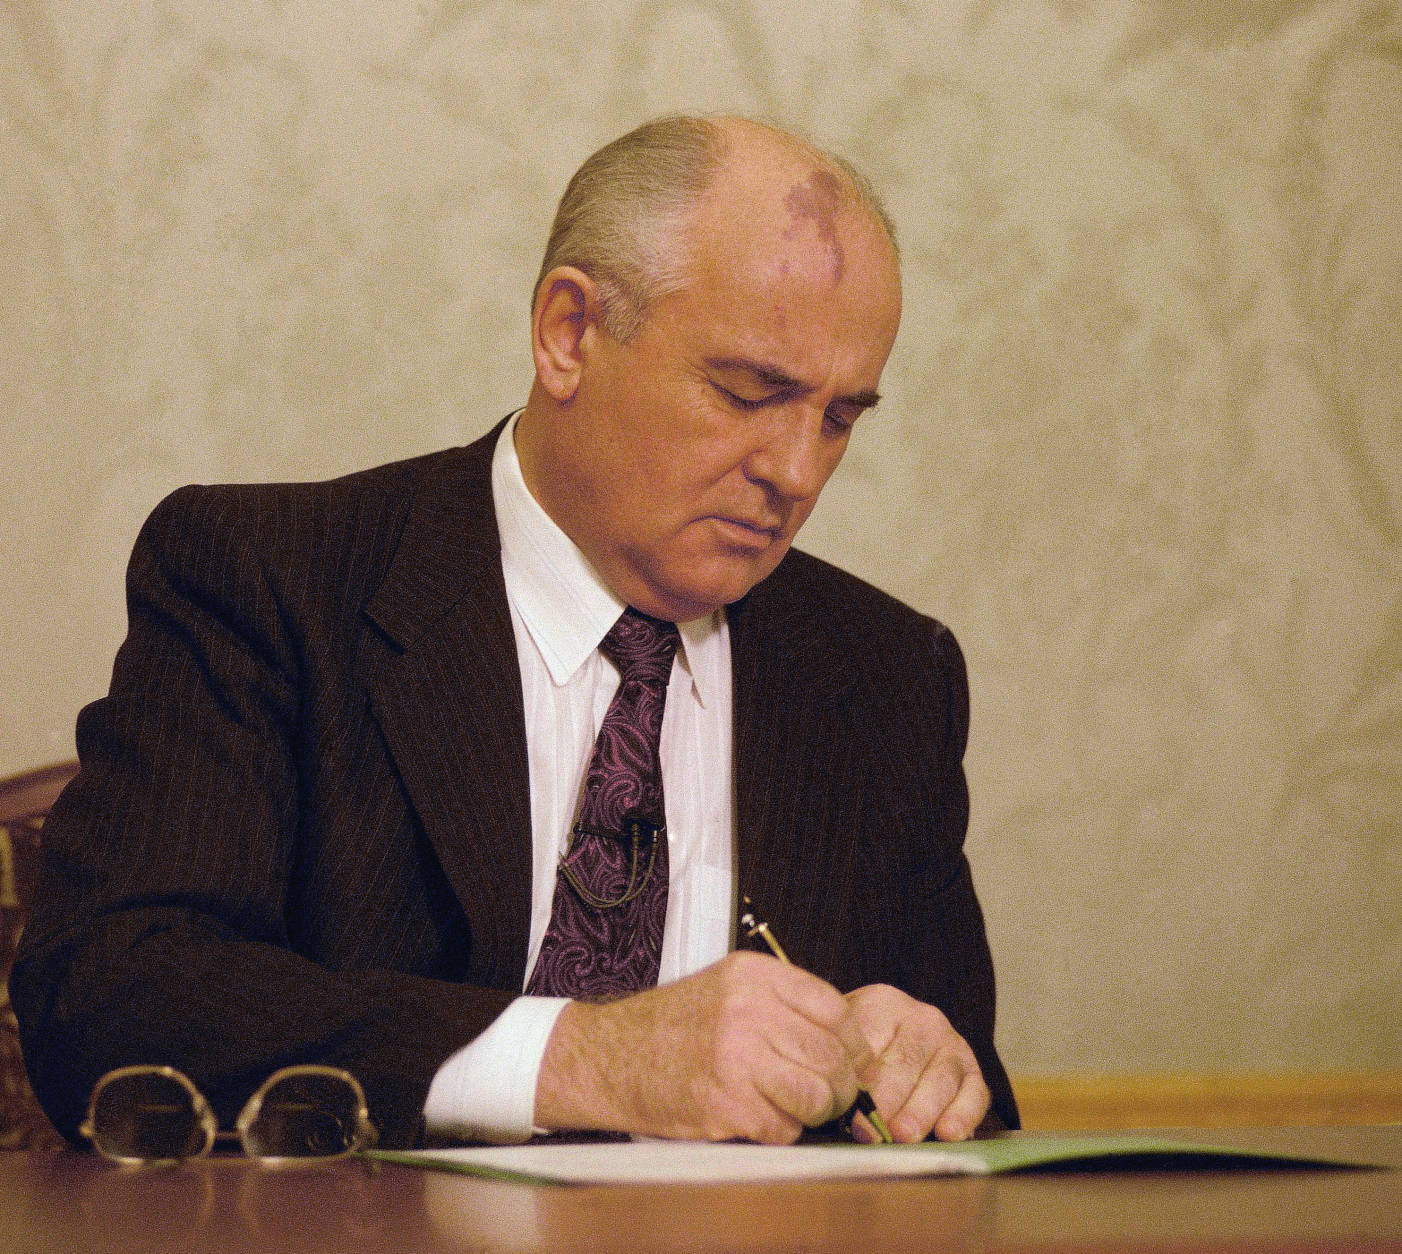 Mikhail Gorbachev, the final leader of the Soviet Union, signs the decree relinquishing control of nuclear weapons to Boris Yeltsin at the Kremlin in Moscow, Wednesday, Dec. 25, 1991. Gorbachev, whose reforms gave Soviet citizens freedom, ended the Cold War and ultimately led to the destruction of his nation. He resigned on Wednesday as president of an empire that no longer exists. (AP Photo/Liu Heung Shing)